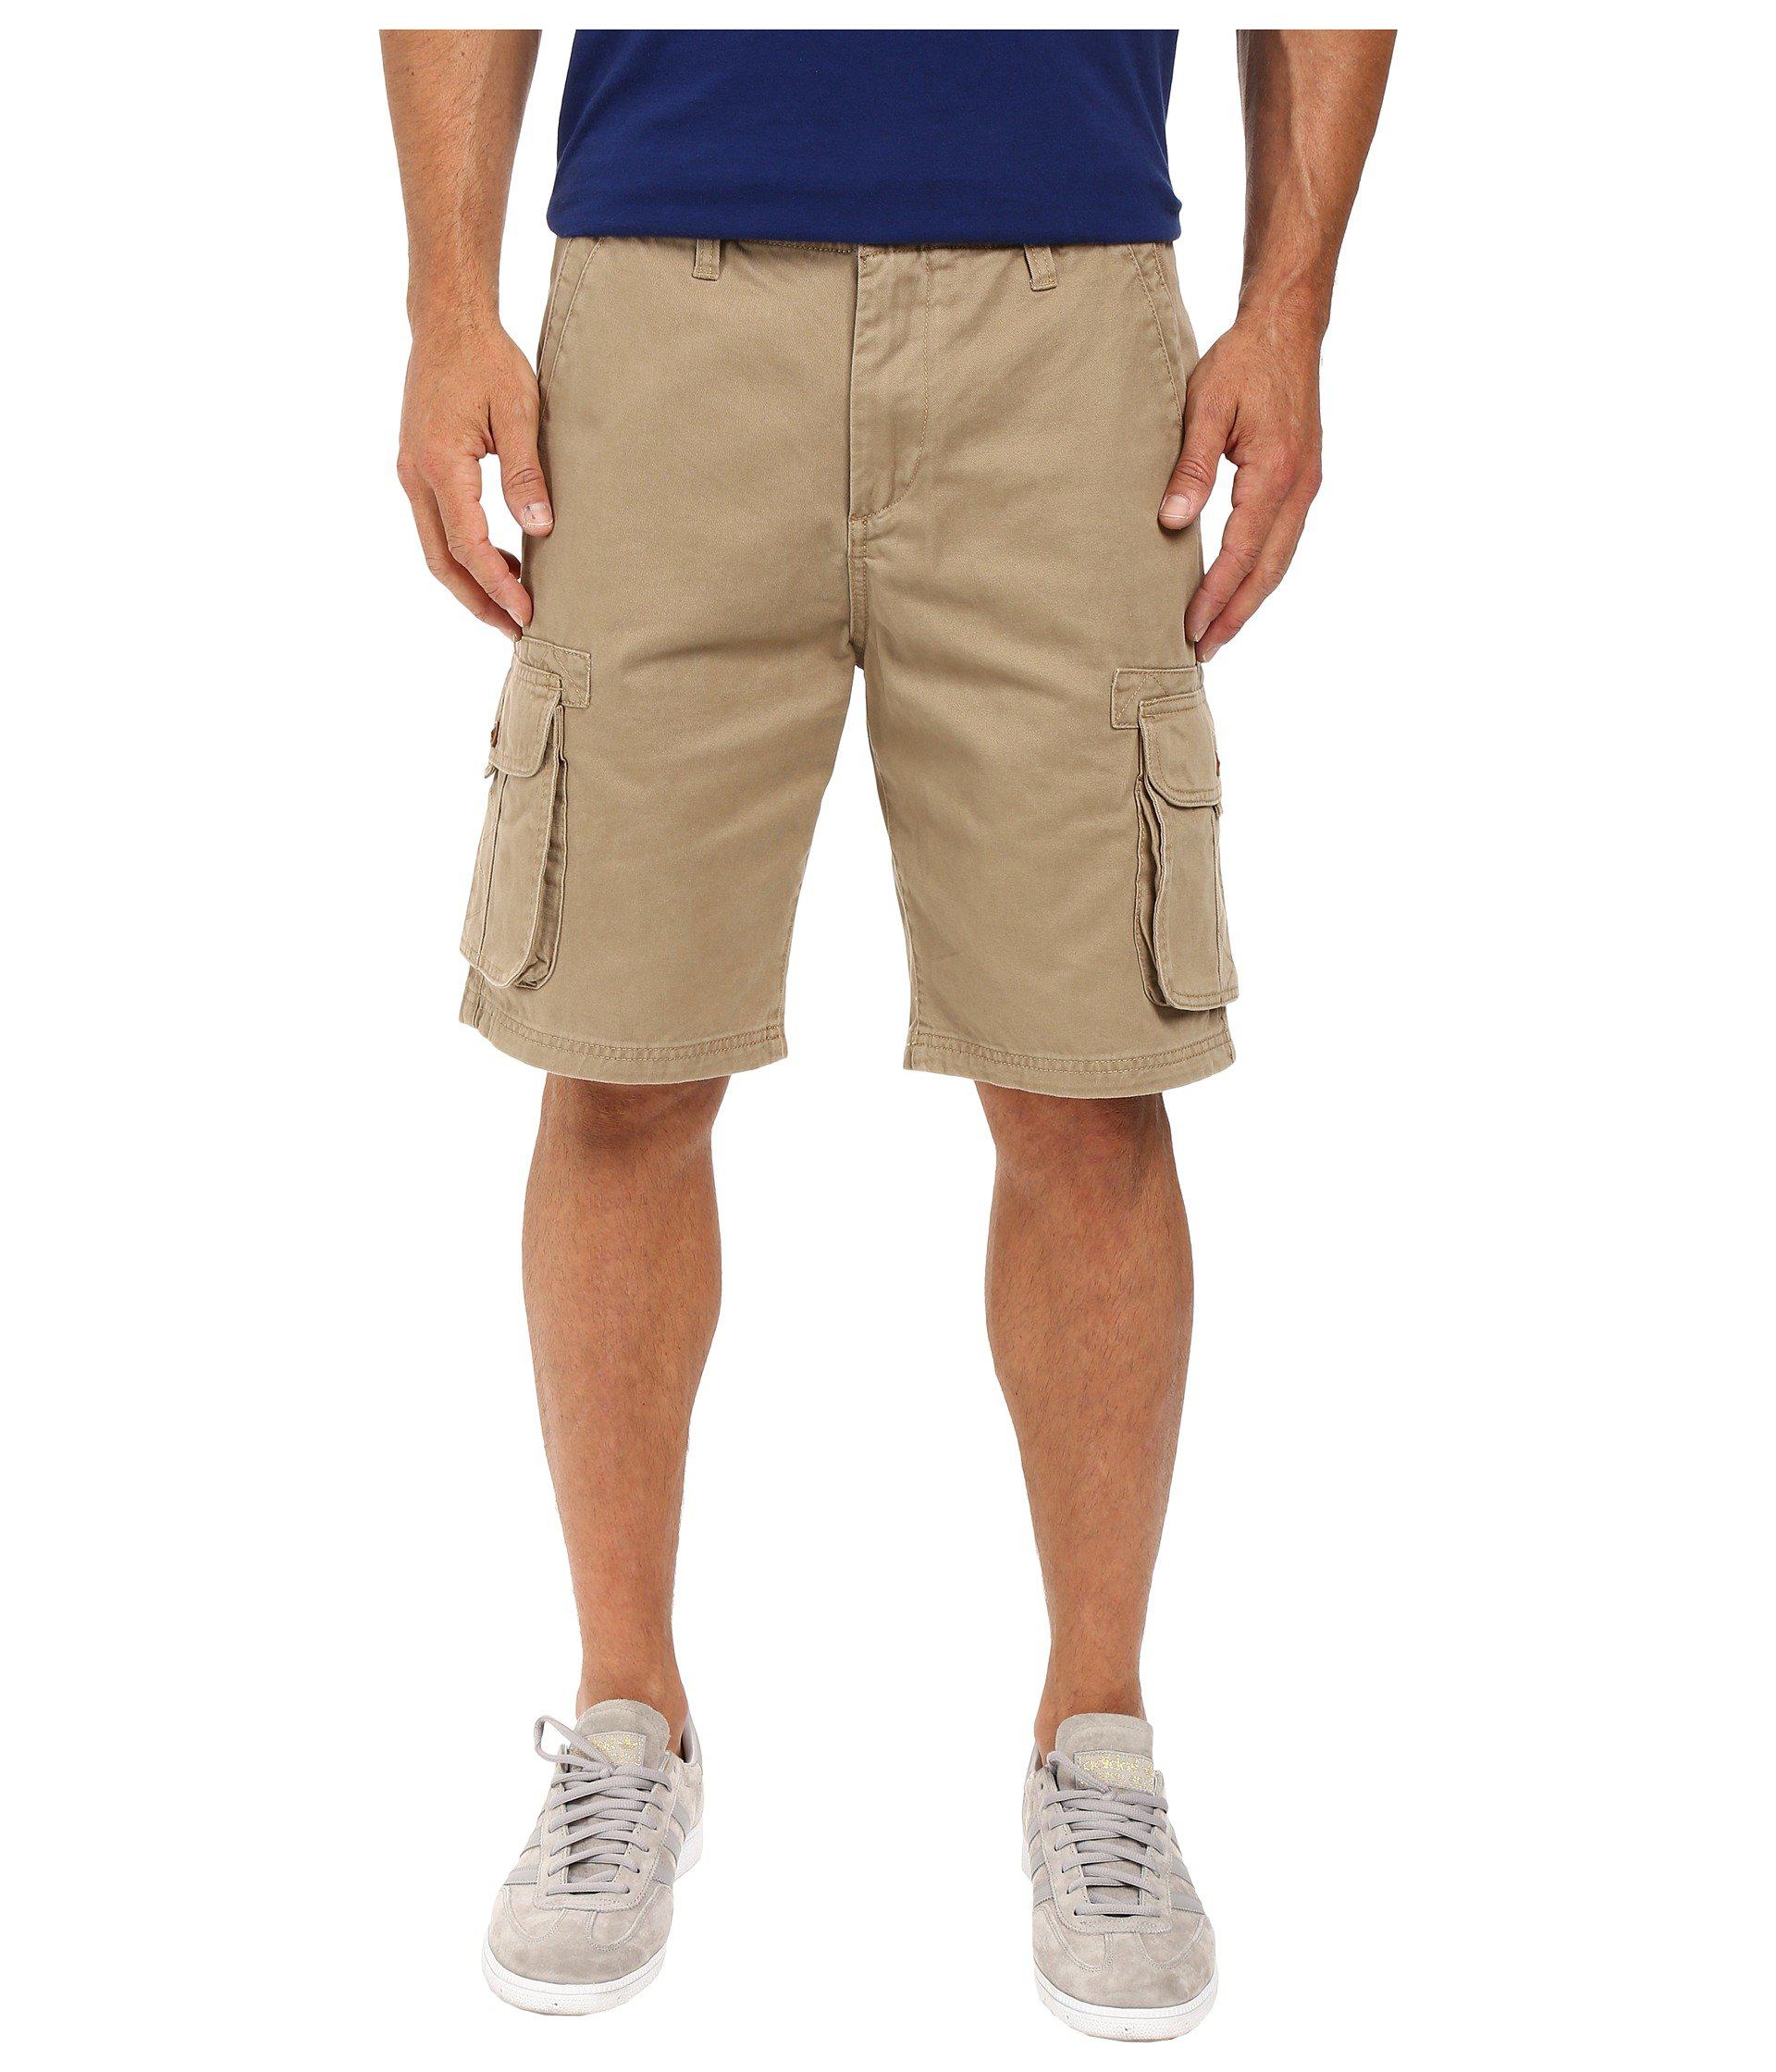 Quiksilver Cotton Everyday Deluxe Cargo Shorts in Natural for Men - Lyst